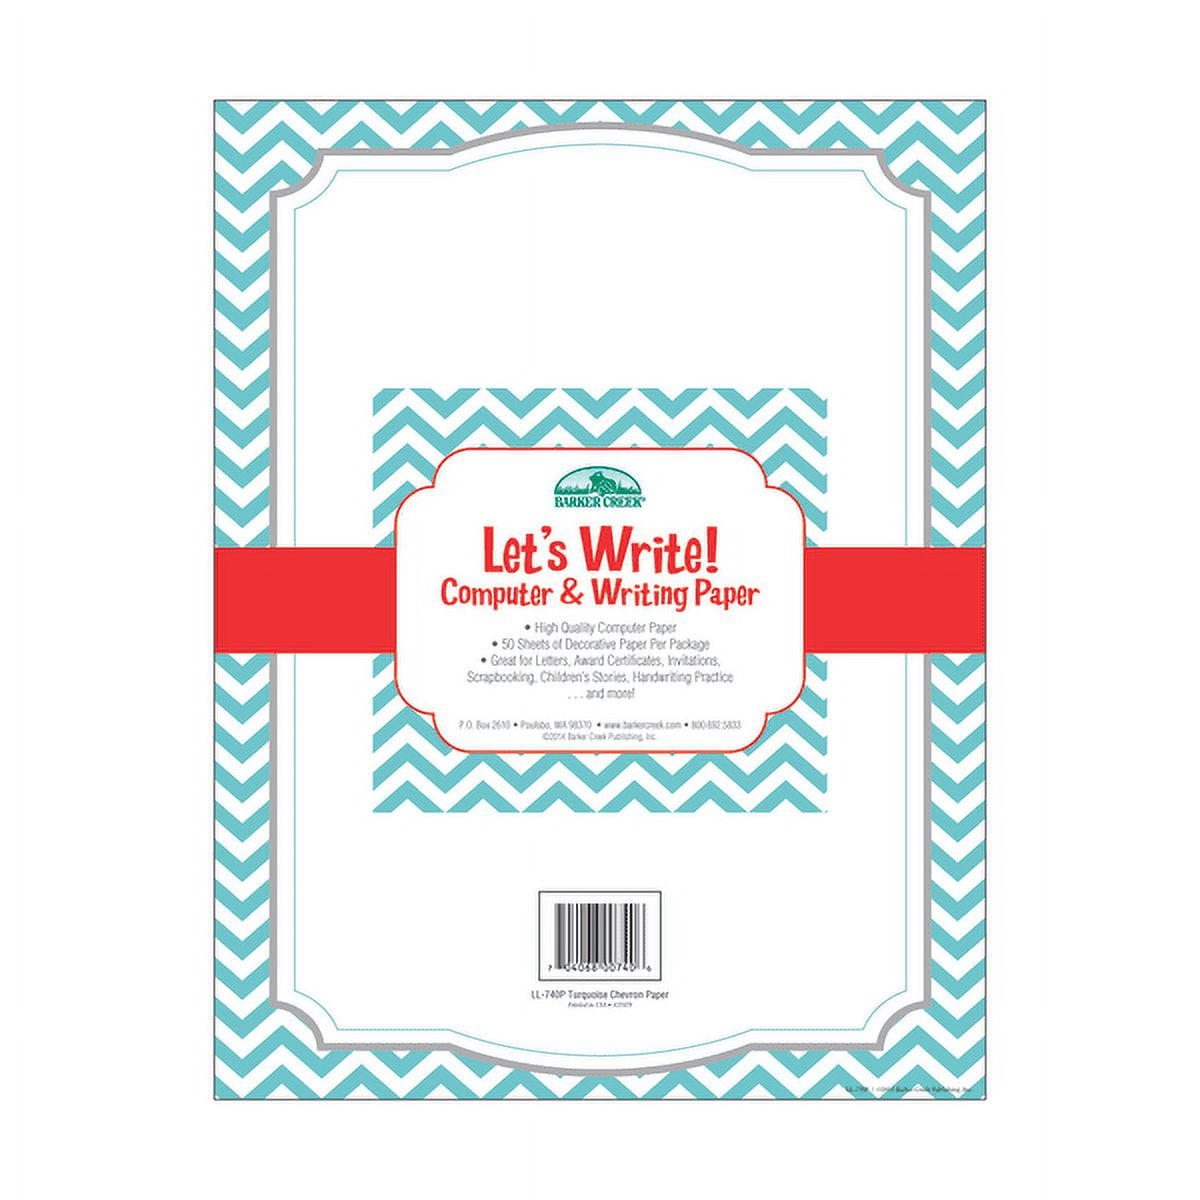 Barker Creek Computer Paper 8 12 x 11 Turquoise Chevron Pack Of 50